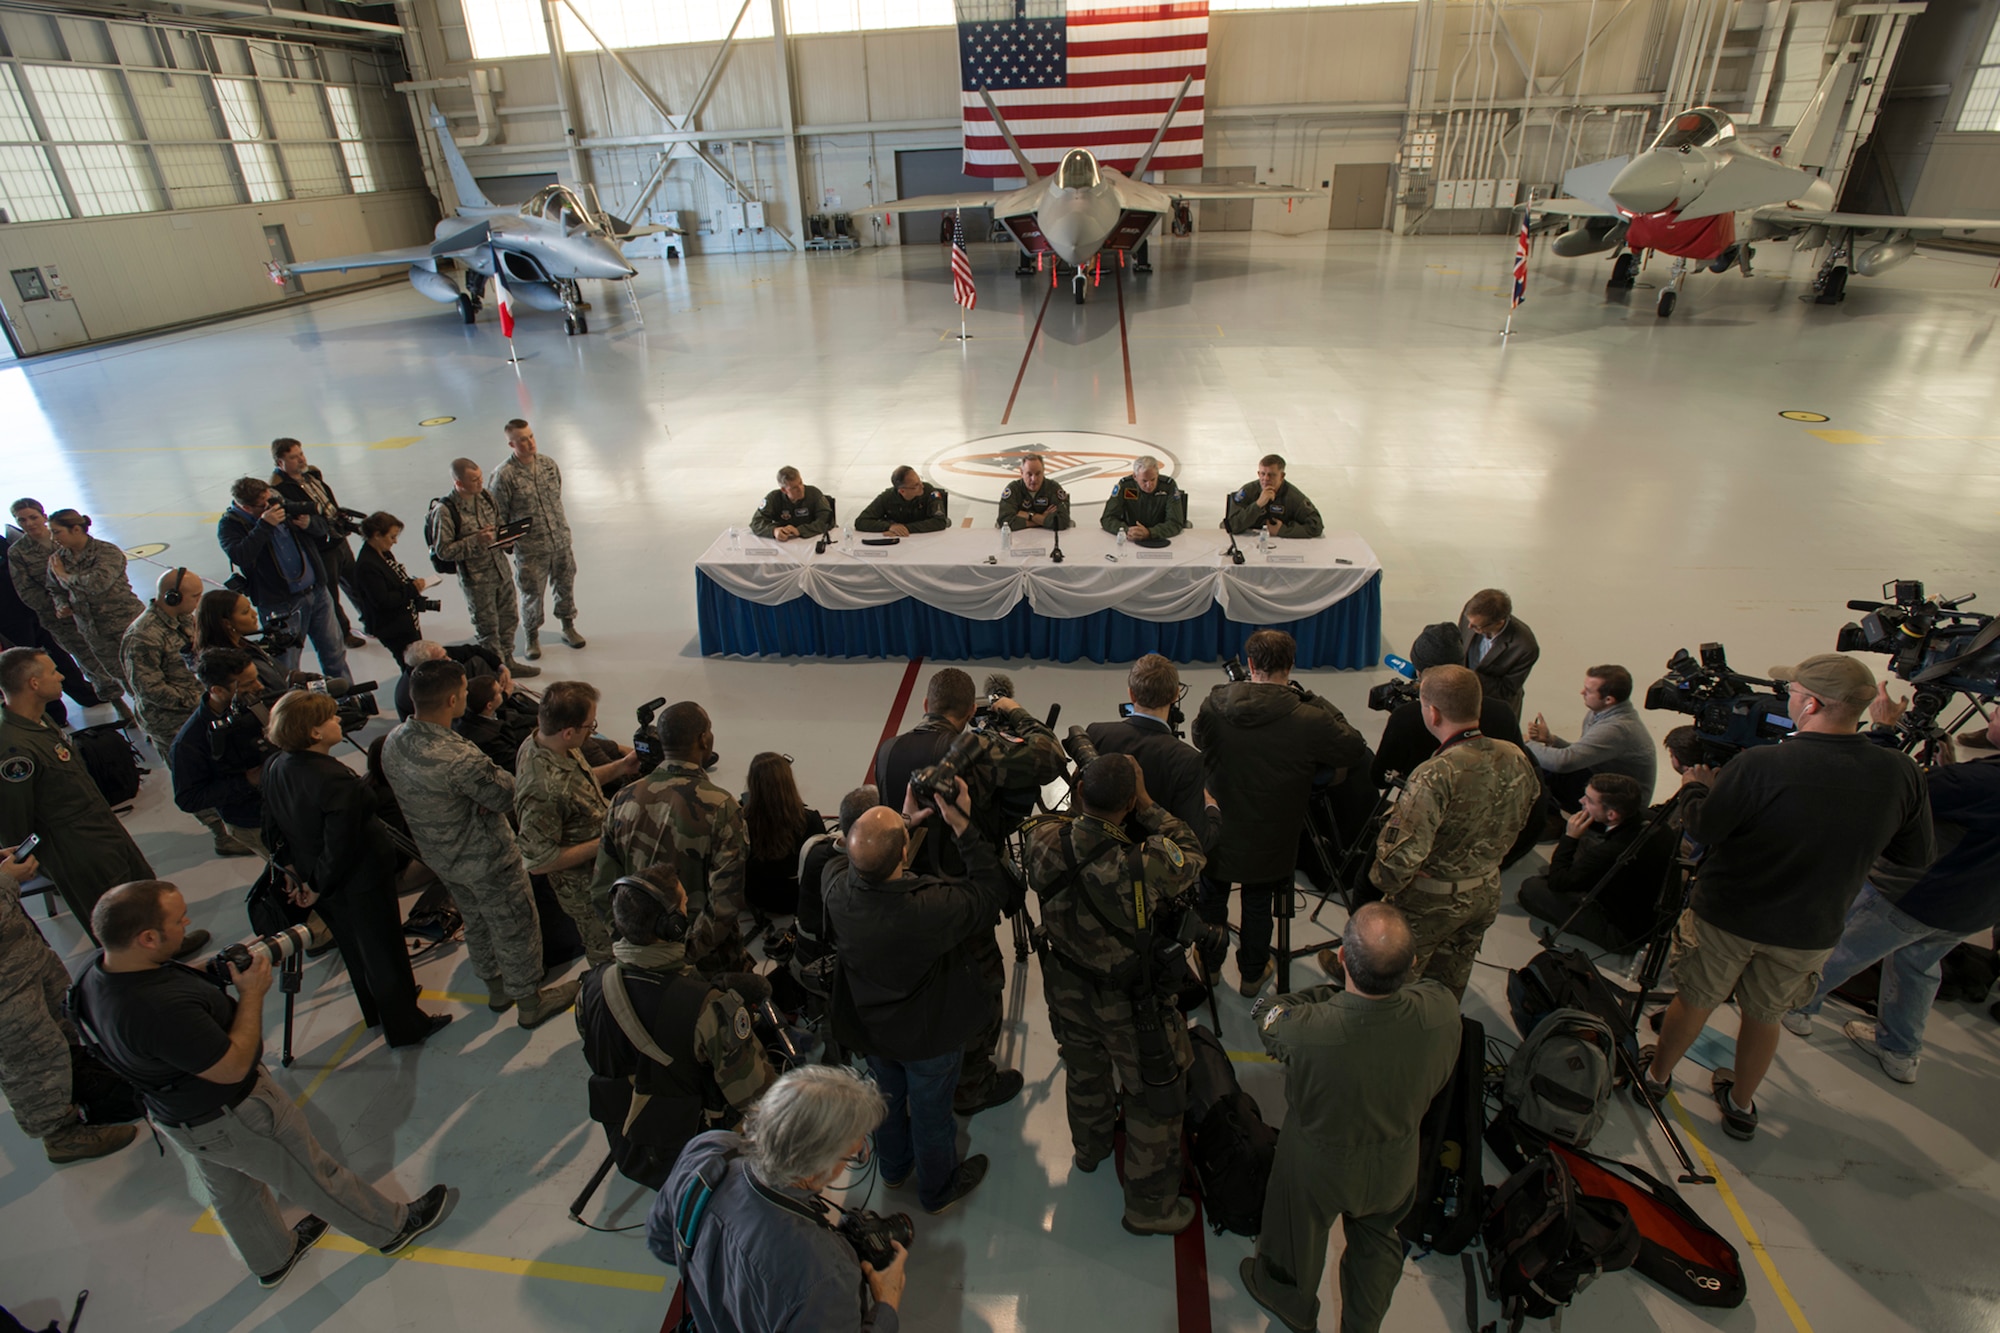 Distinguished visitors from the U.S., U.K., and French air forces answer questions during a press conference hosted during the Trilateral Exercise at Langley Air Force Base, Va., Dec. 15, 2015. The exercise is intended to train coalition fighters to respond and work together during highly-contested, degraded and operationally-limited environments (U.S. Air Force photo by Tech. Sgt. Katie Gar Ward)